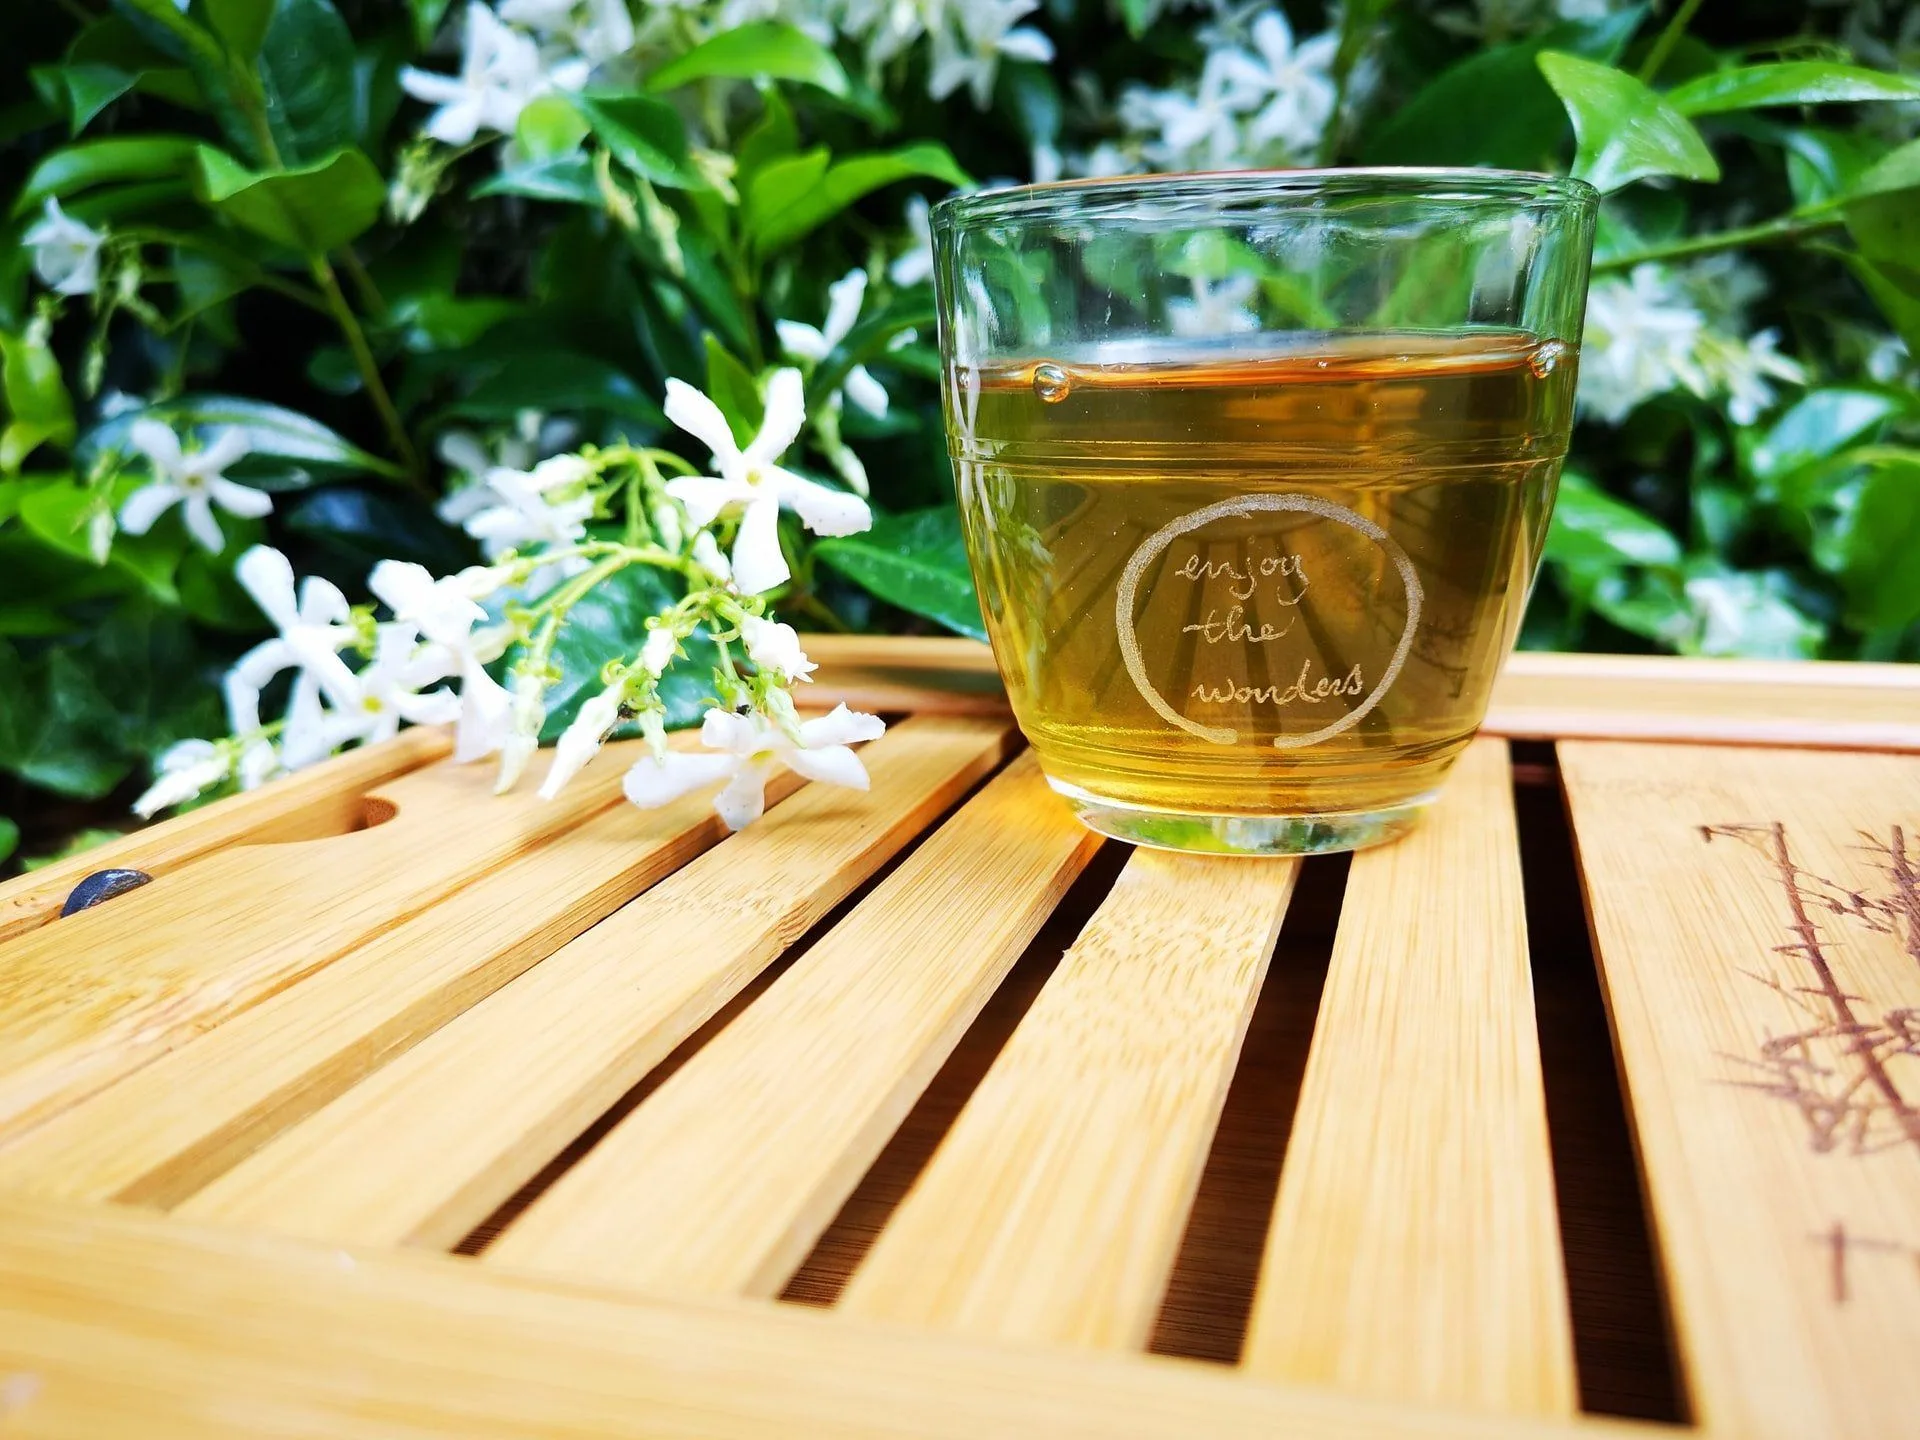 The Best Teas to Drink for Health